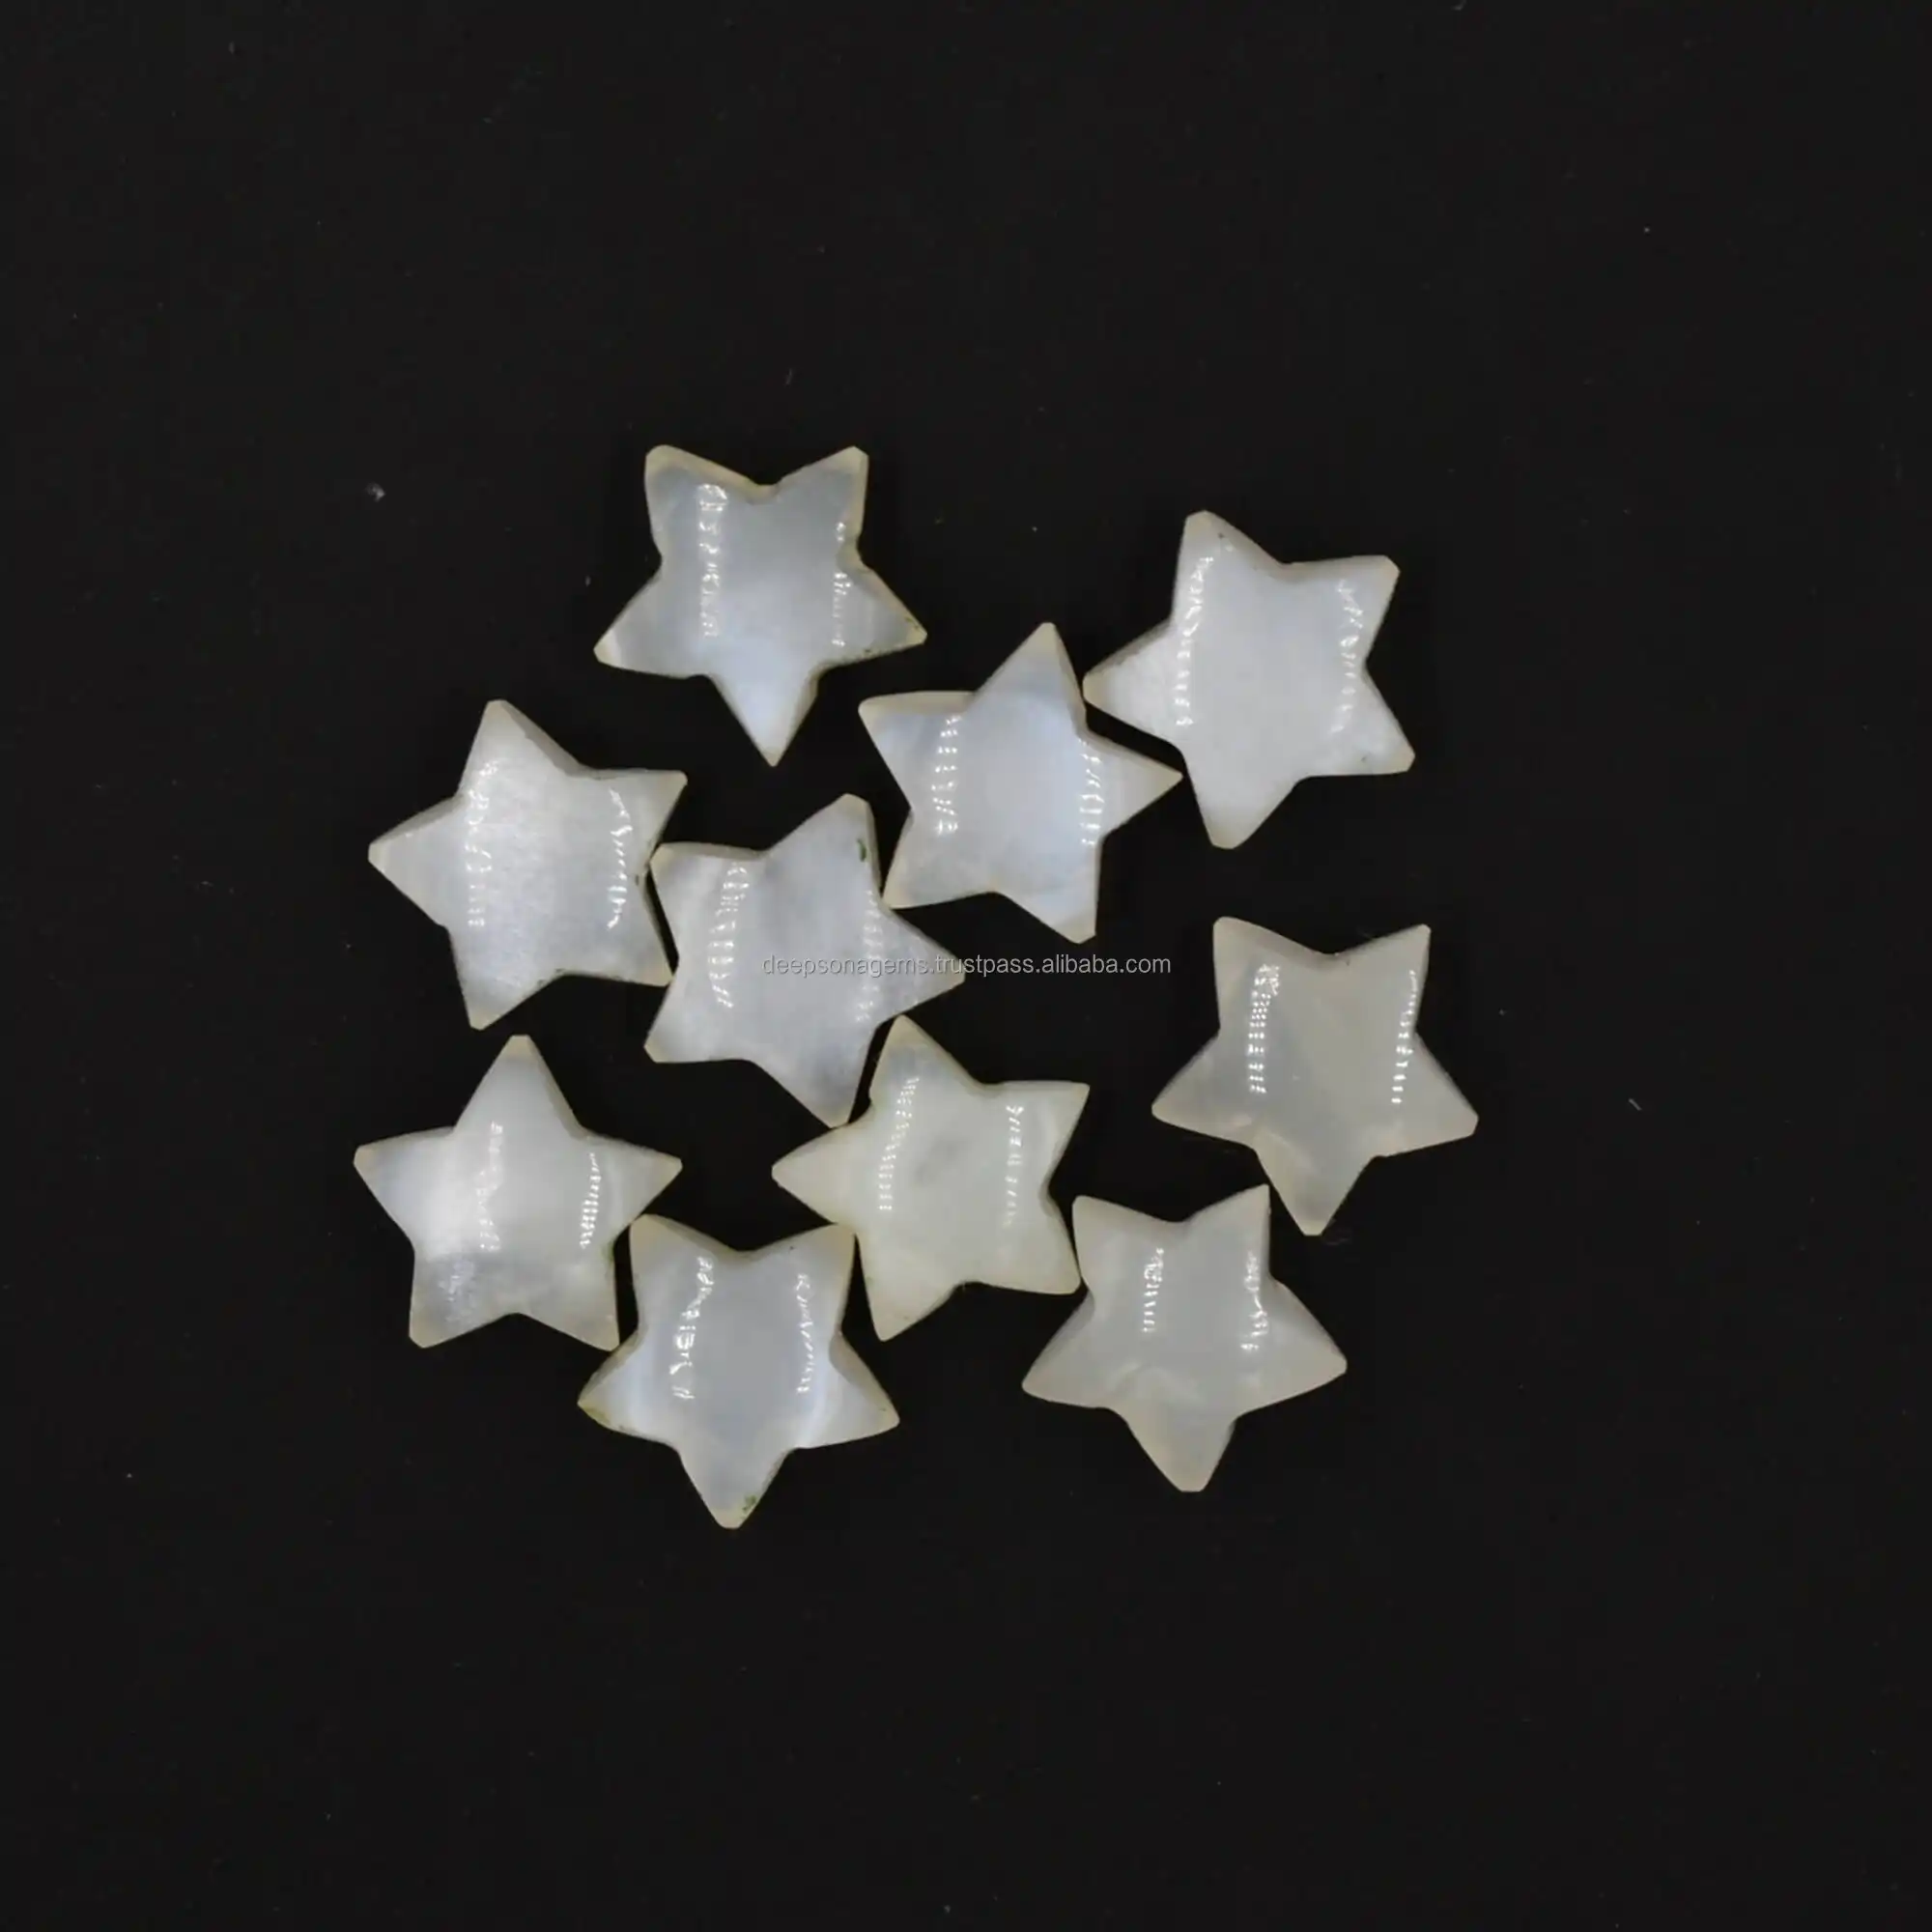 10 mm Star Shape White Moonstone Briolette Beads Strand From Wholesaler at Best Price, Precious Gemstone For Jewelry